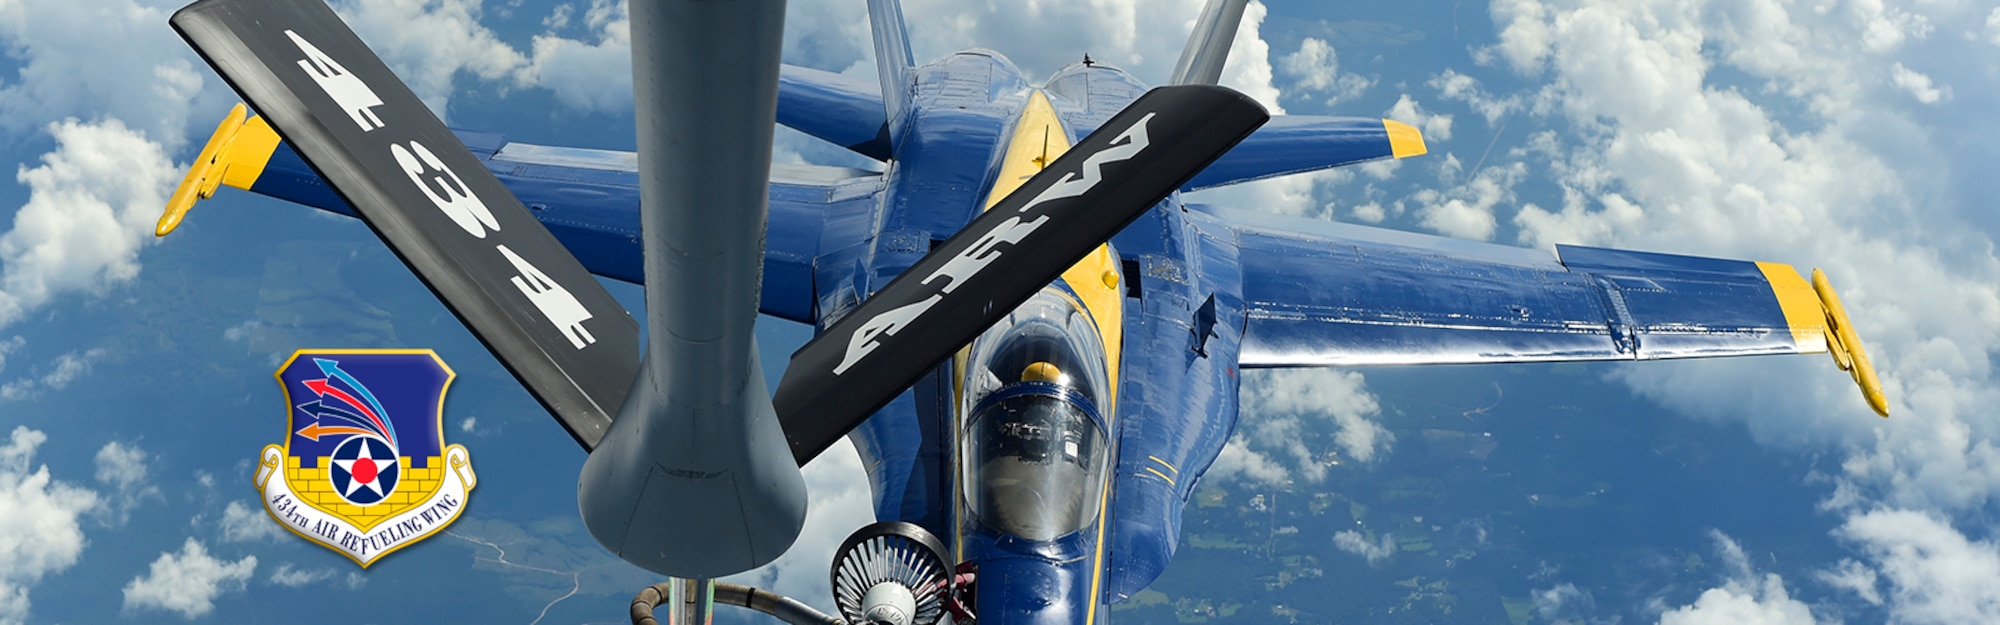 Two KC-135R Stratotankers from the 434 Air Refueling Wing at Grissom Air Reserve Base, Ind., refueled seven F/A-18 Hornets from the U.S. Navy Blue Angels aerial demonstration team Sept. 26, 2018.  The demonstration team linked up with the Hoosier Wing tankers while traveling from their home base at Pensacola Naval Air Station, Fla., en route to their next air show at Marine Corps Air Station Miramar, Calif. (U.S. Air Force photo by Staff Sgt. Chris Massey)